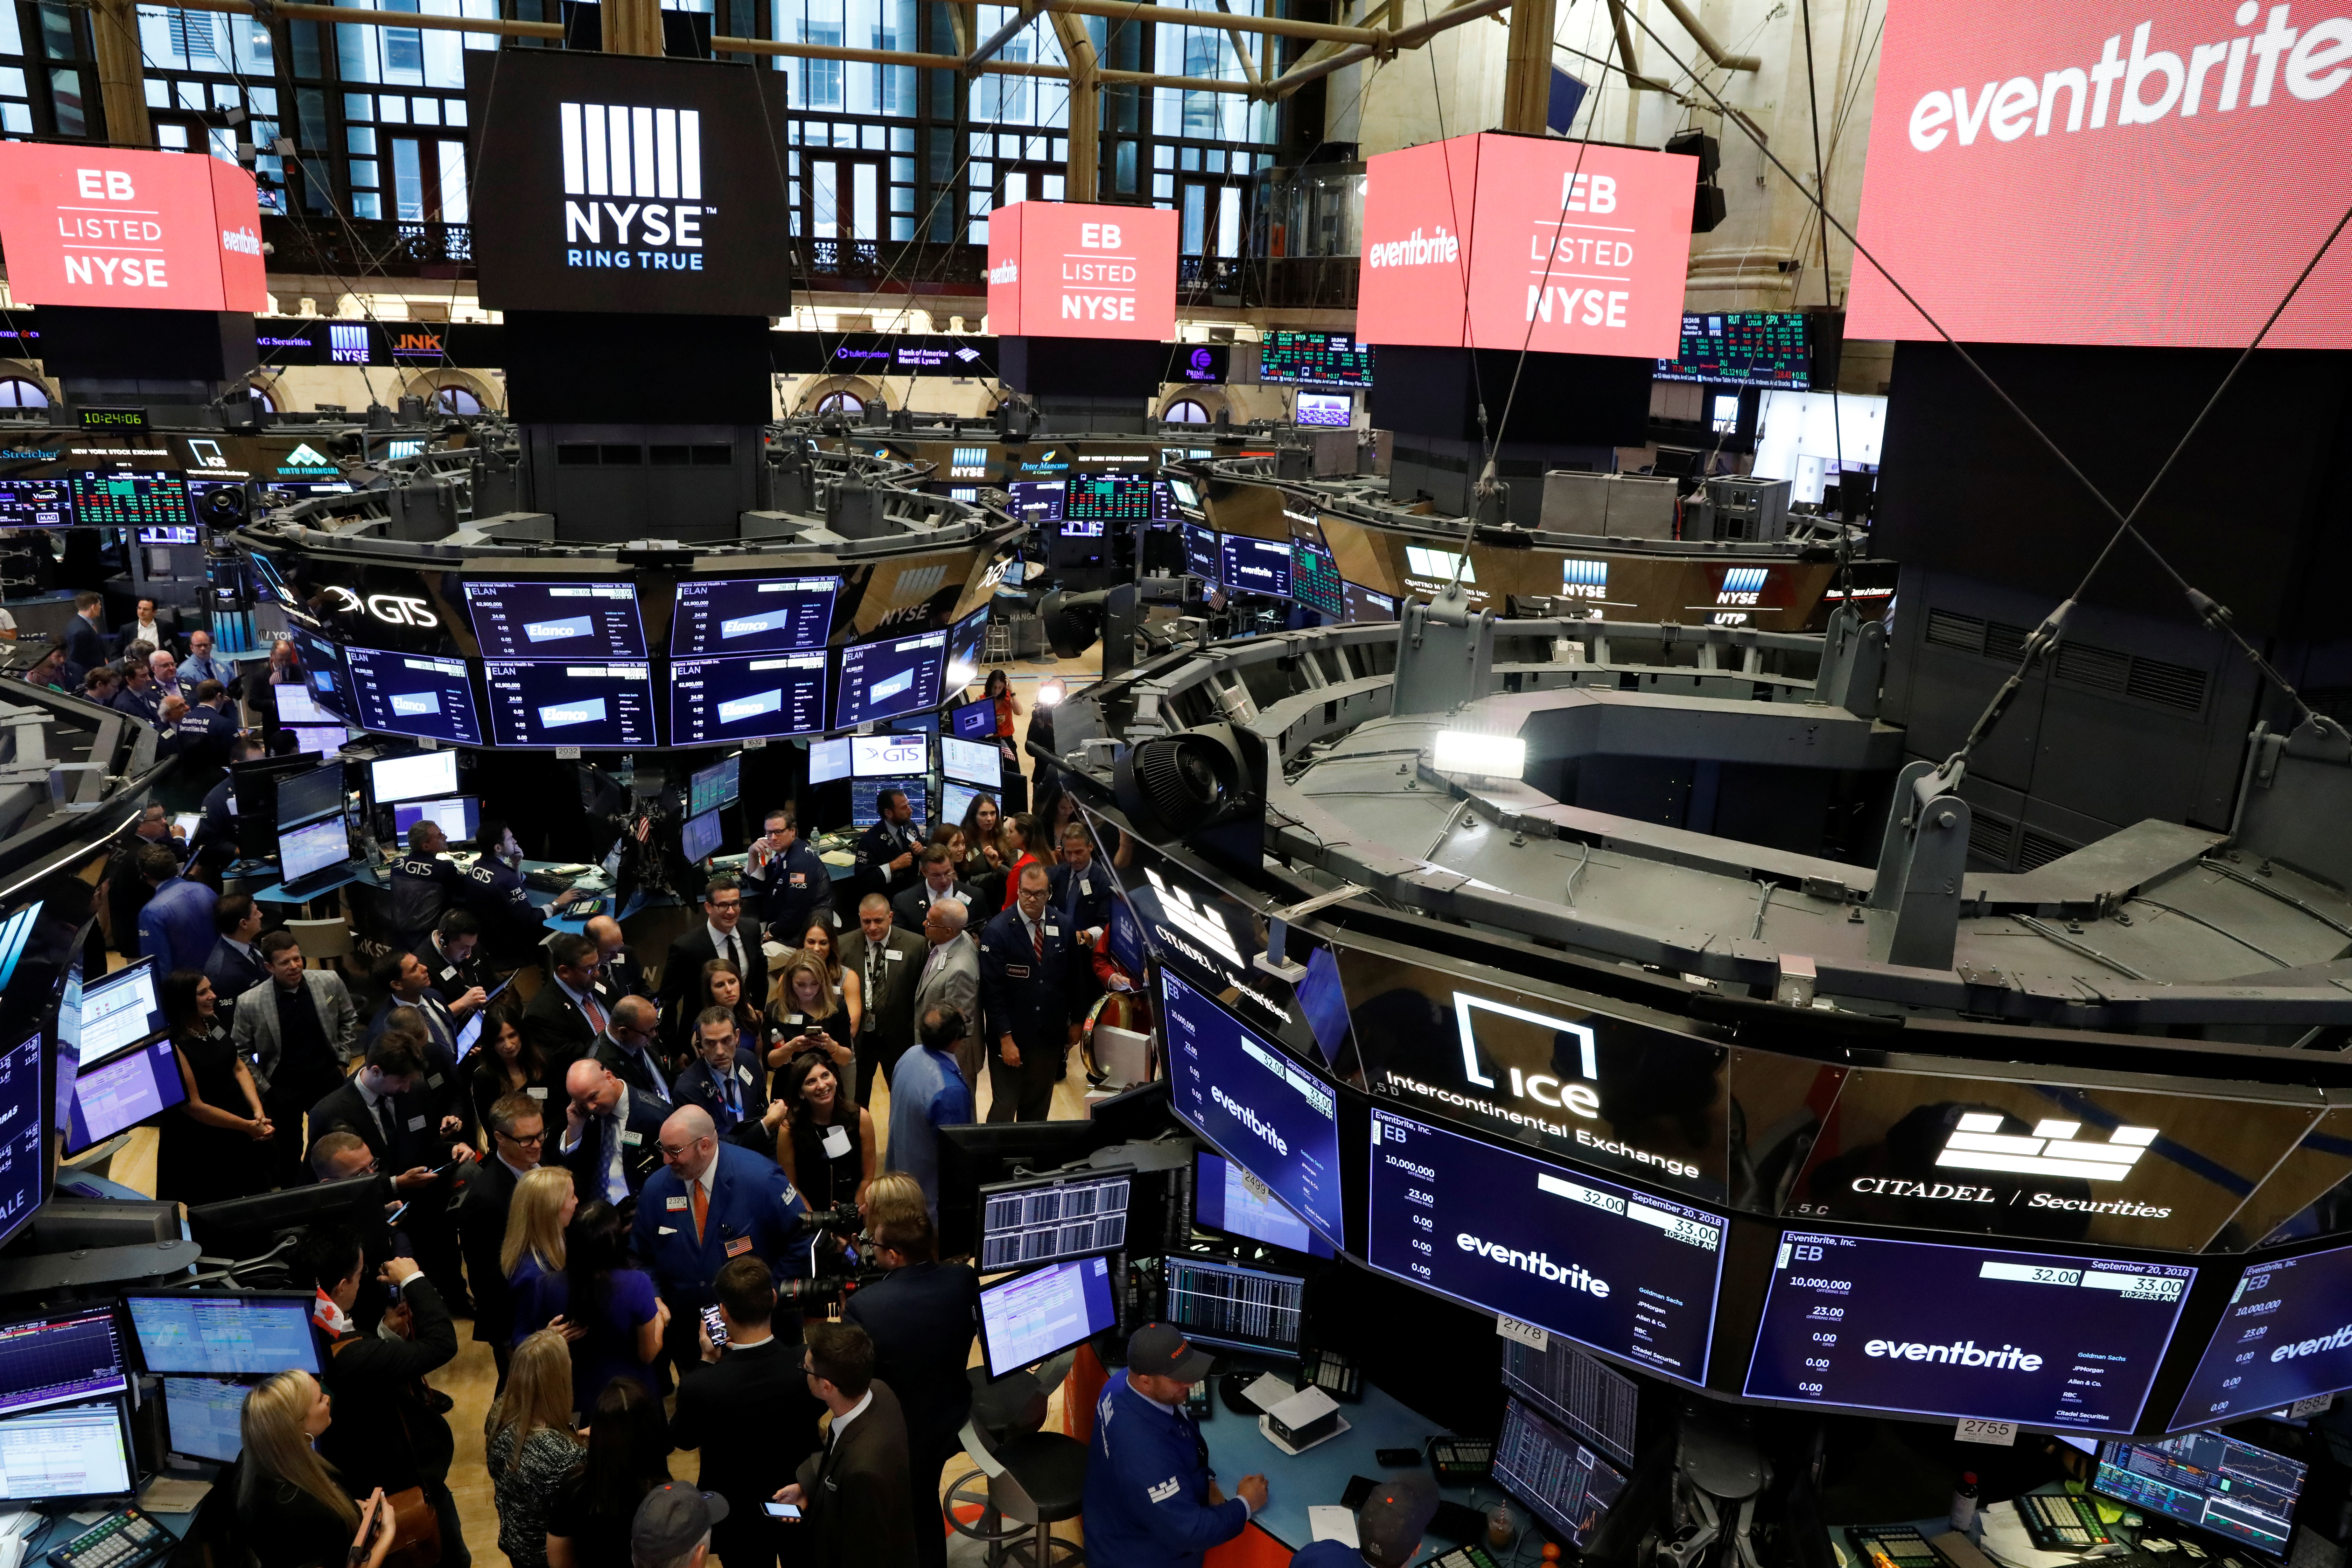 Traders gather at Eventbrite Inc.'s IPO awaiting for the stock to begin trading at the New York Stock Exchange (NYSE) in New York